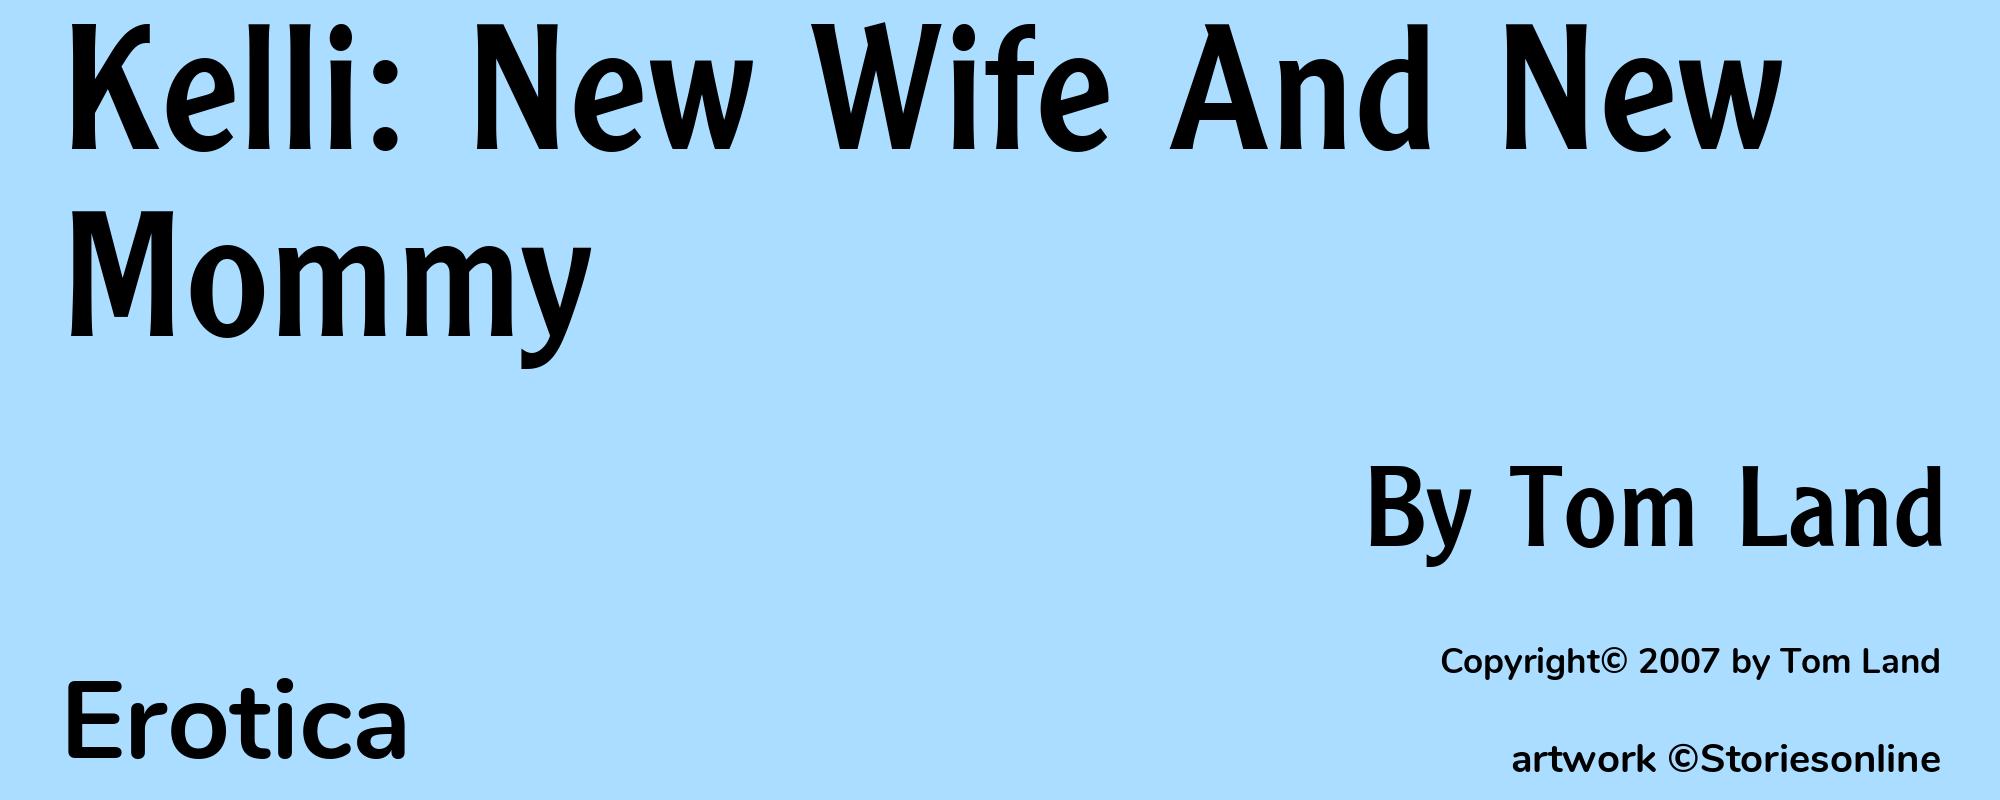 Kelli: New Wife And New Mommy - Cover